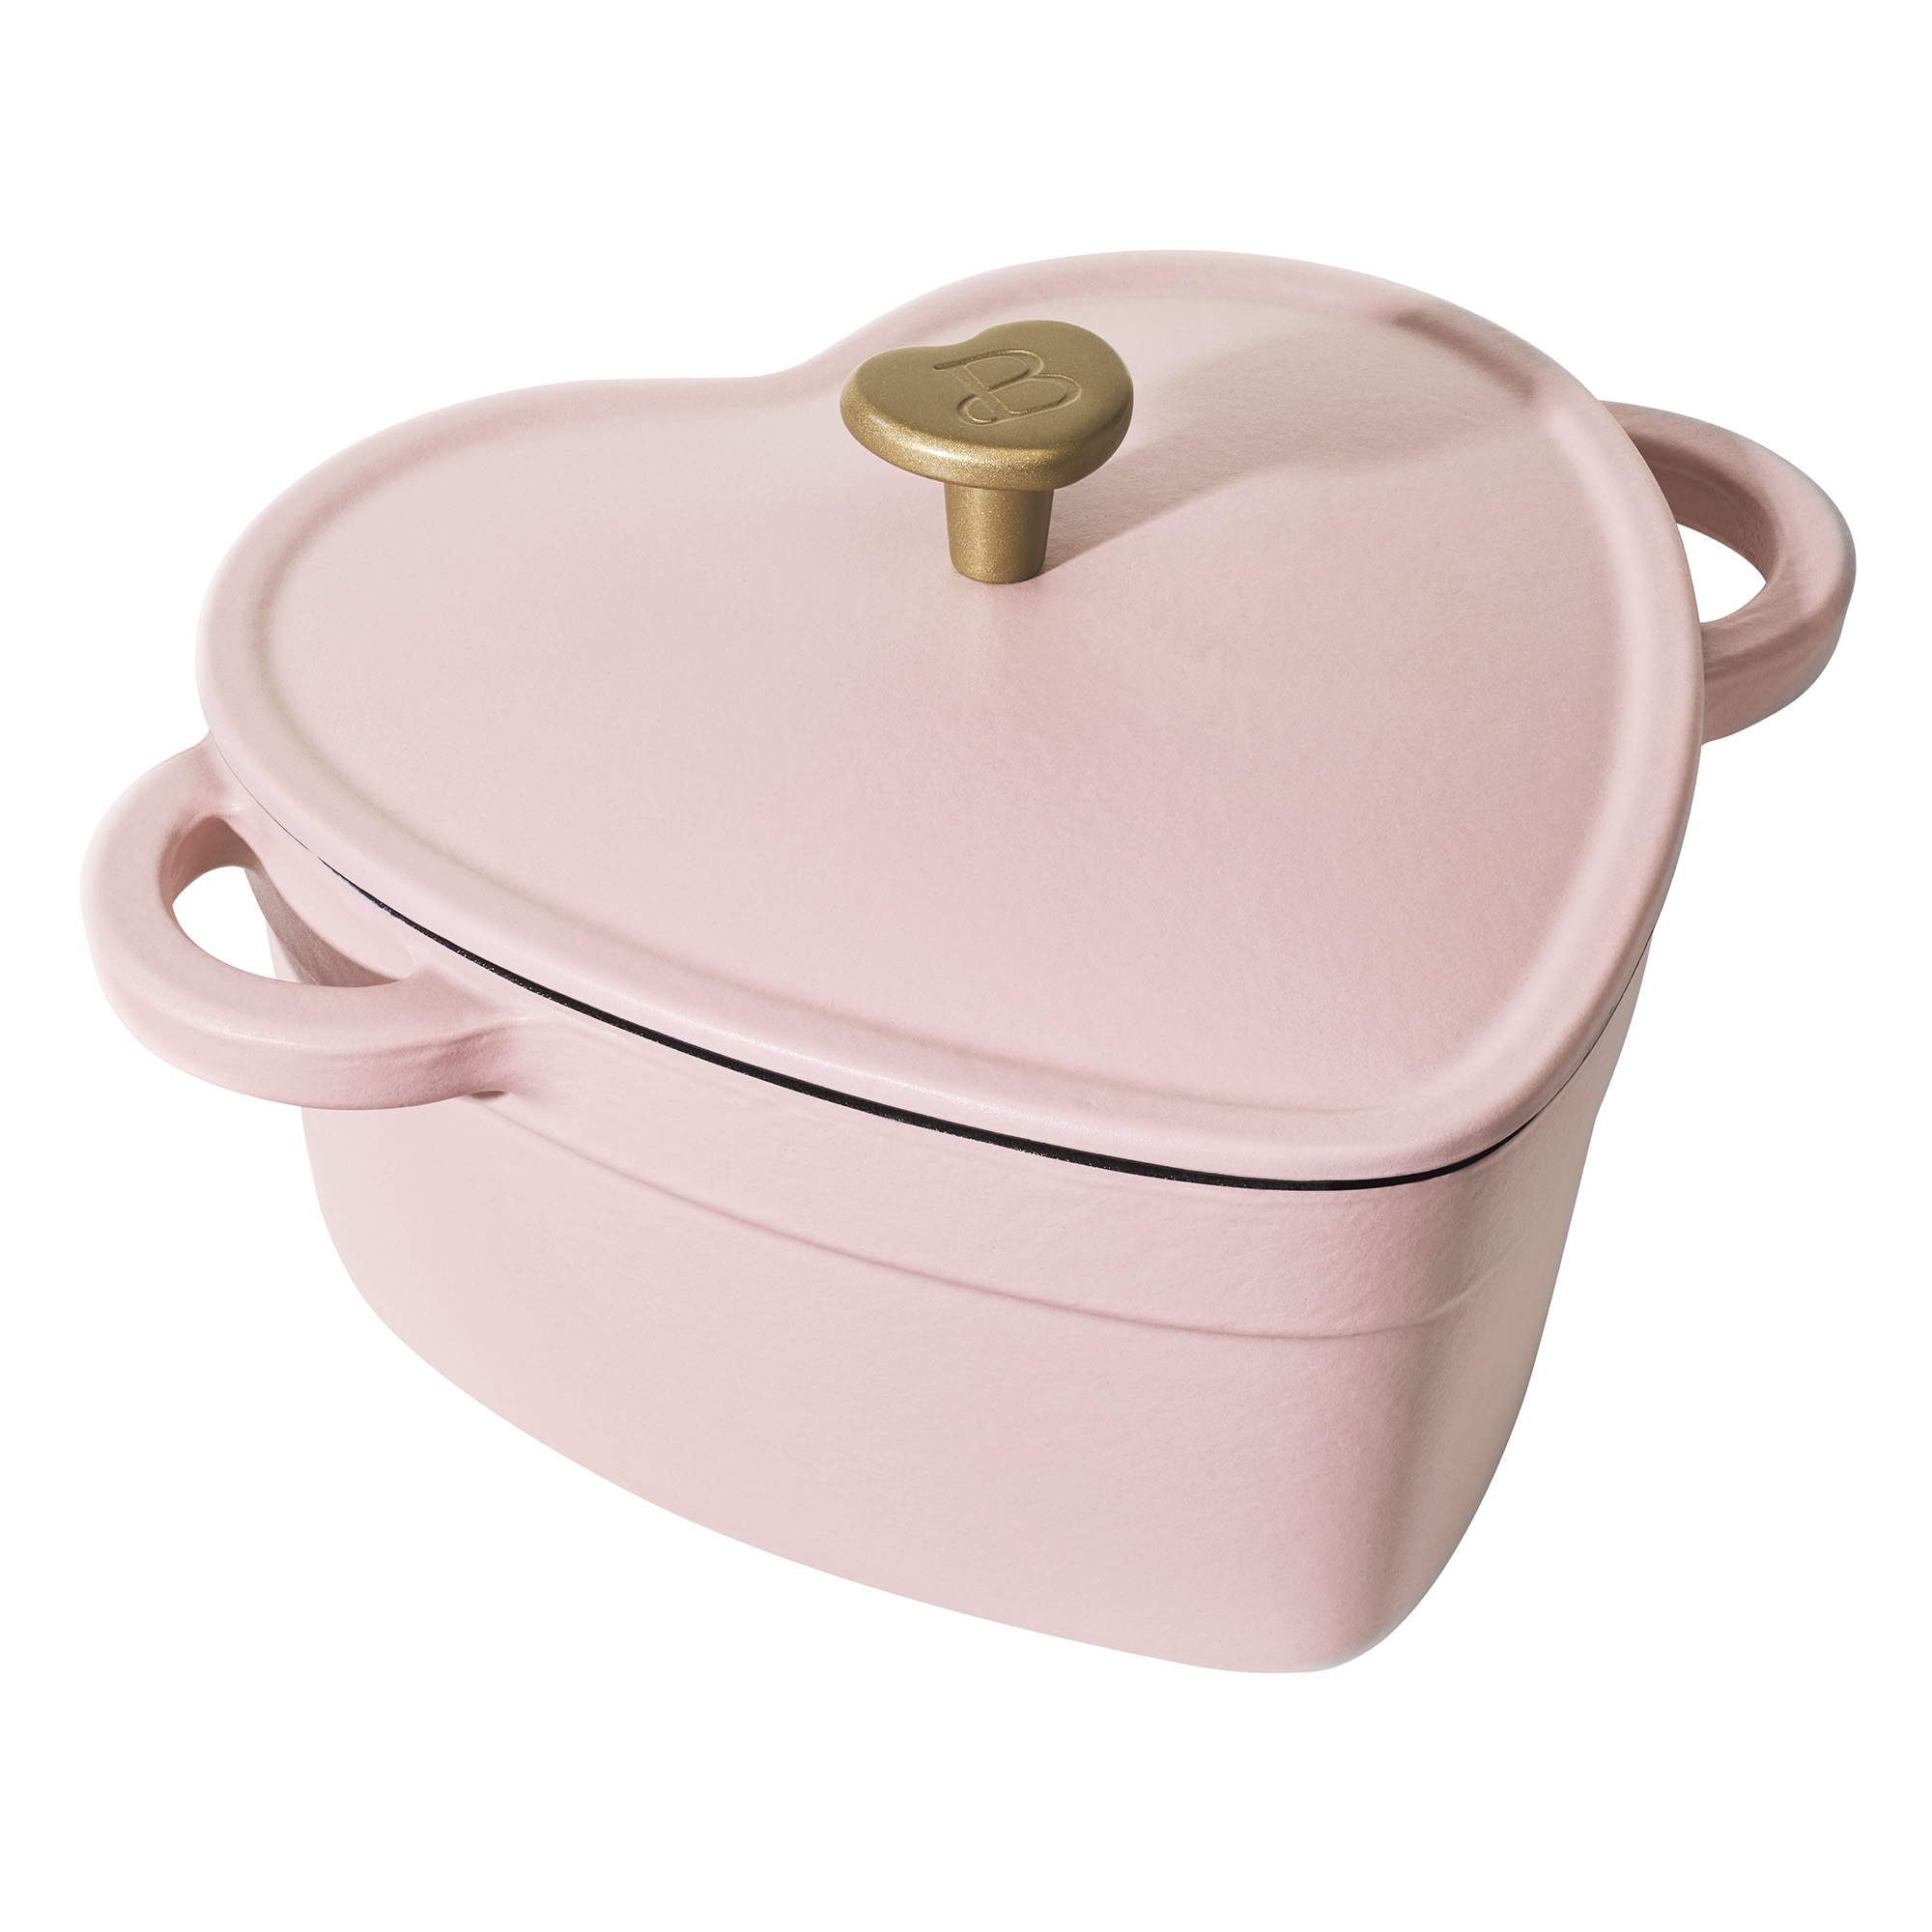 Beautiful 2QT Cast Iron Heart Dutch Oven, Pink Champagne by Drew Barrymore - image 1 of 10